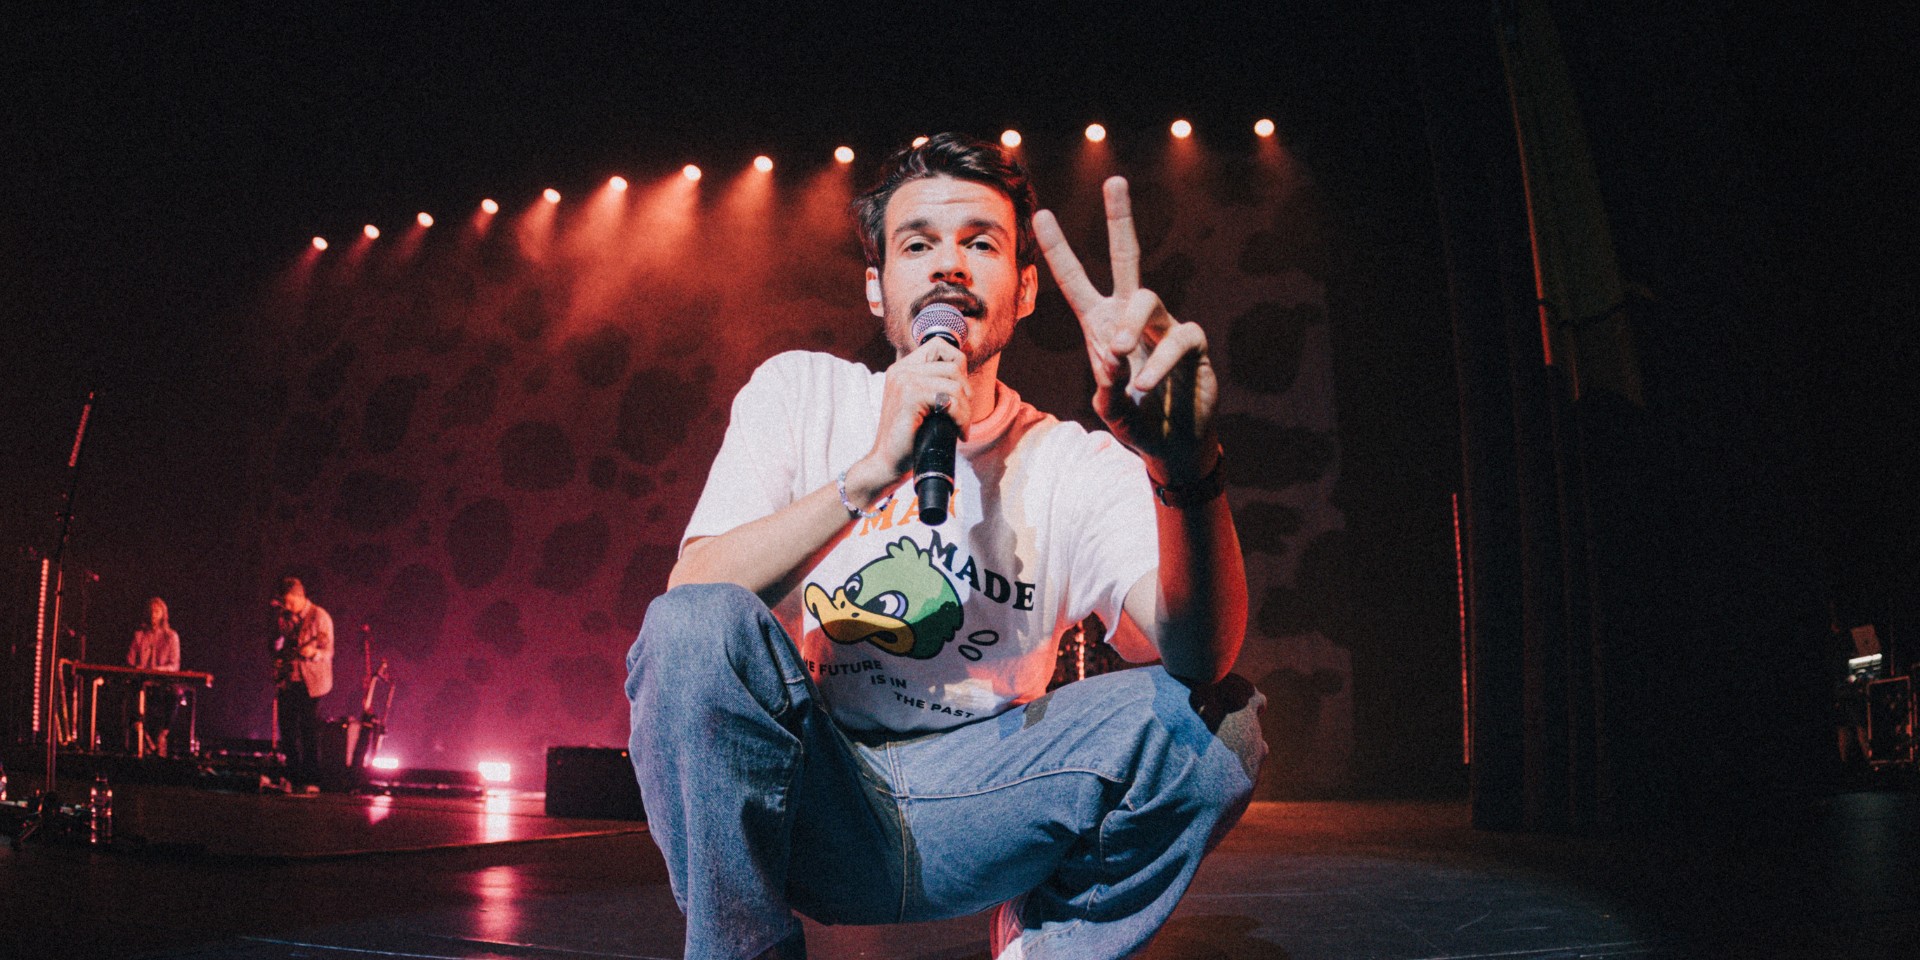 Concert review: Rex Orange County gives emotion-filled performance